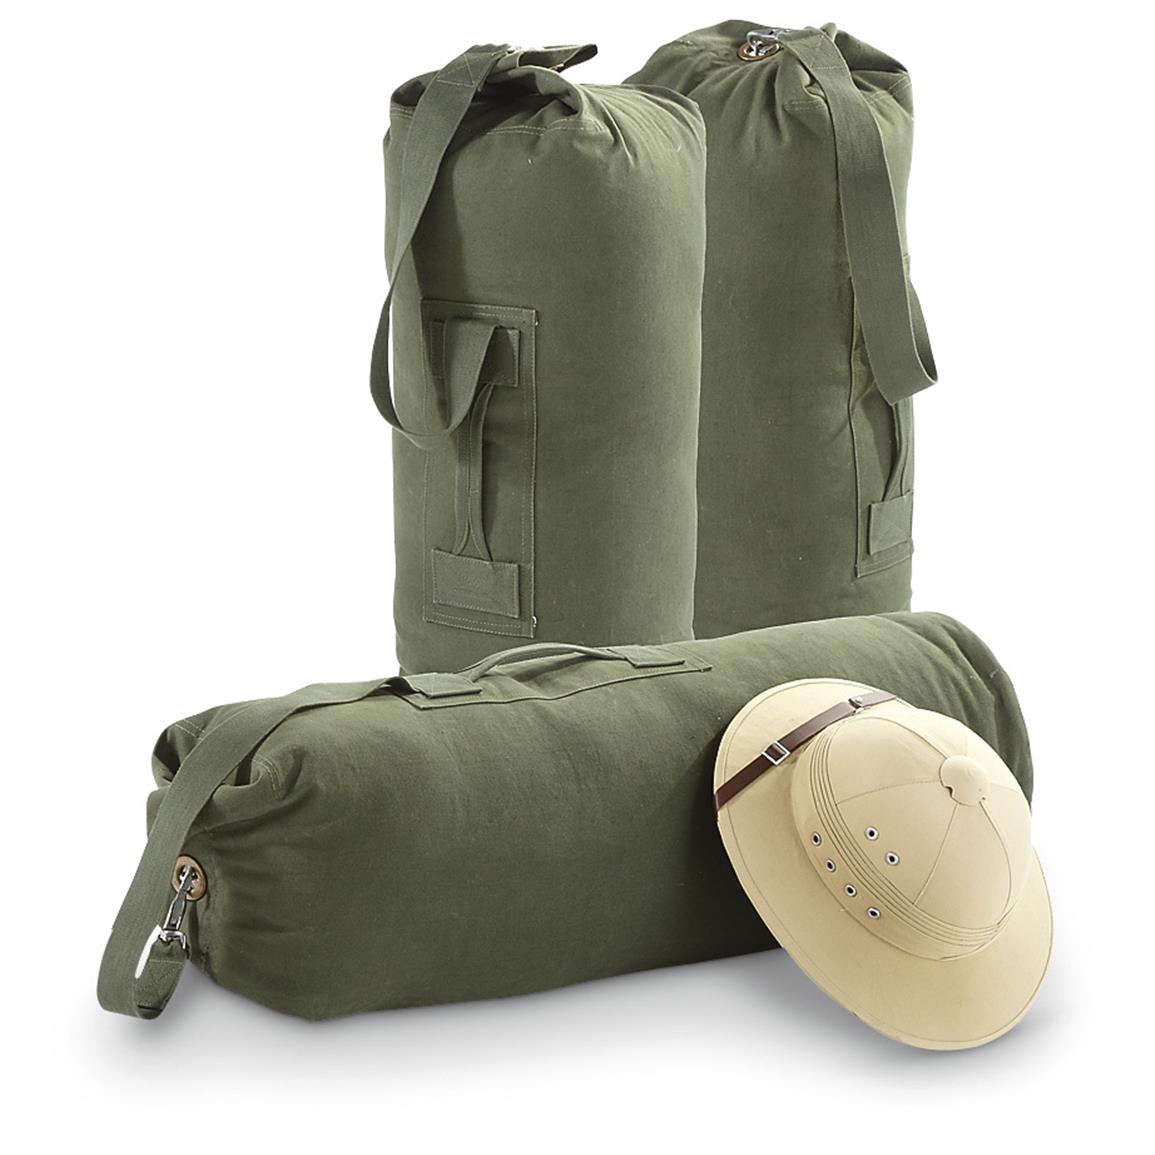 3 Used British Military Surplus Canvas Duffel Bags - 421490, Military & Camo Duffle Bags at ...